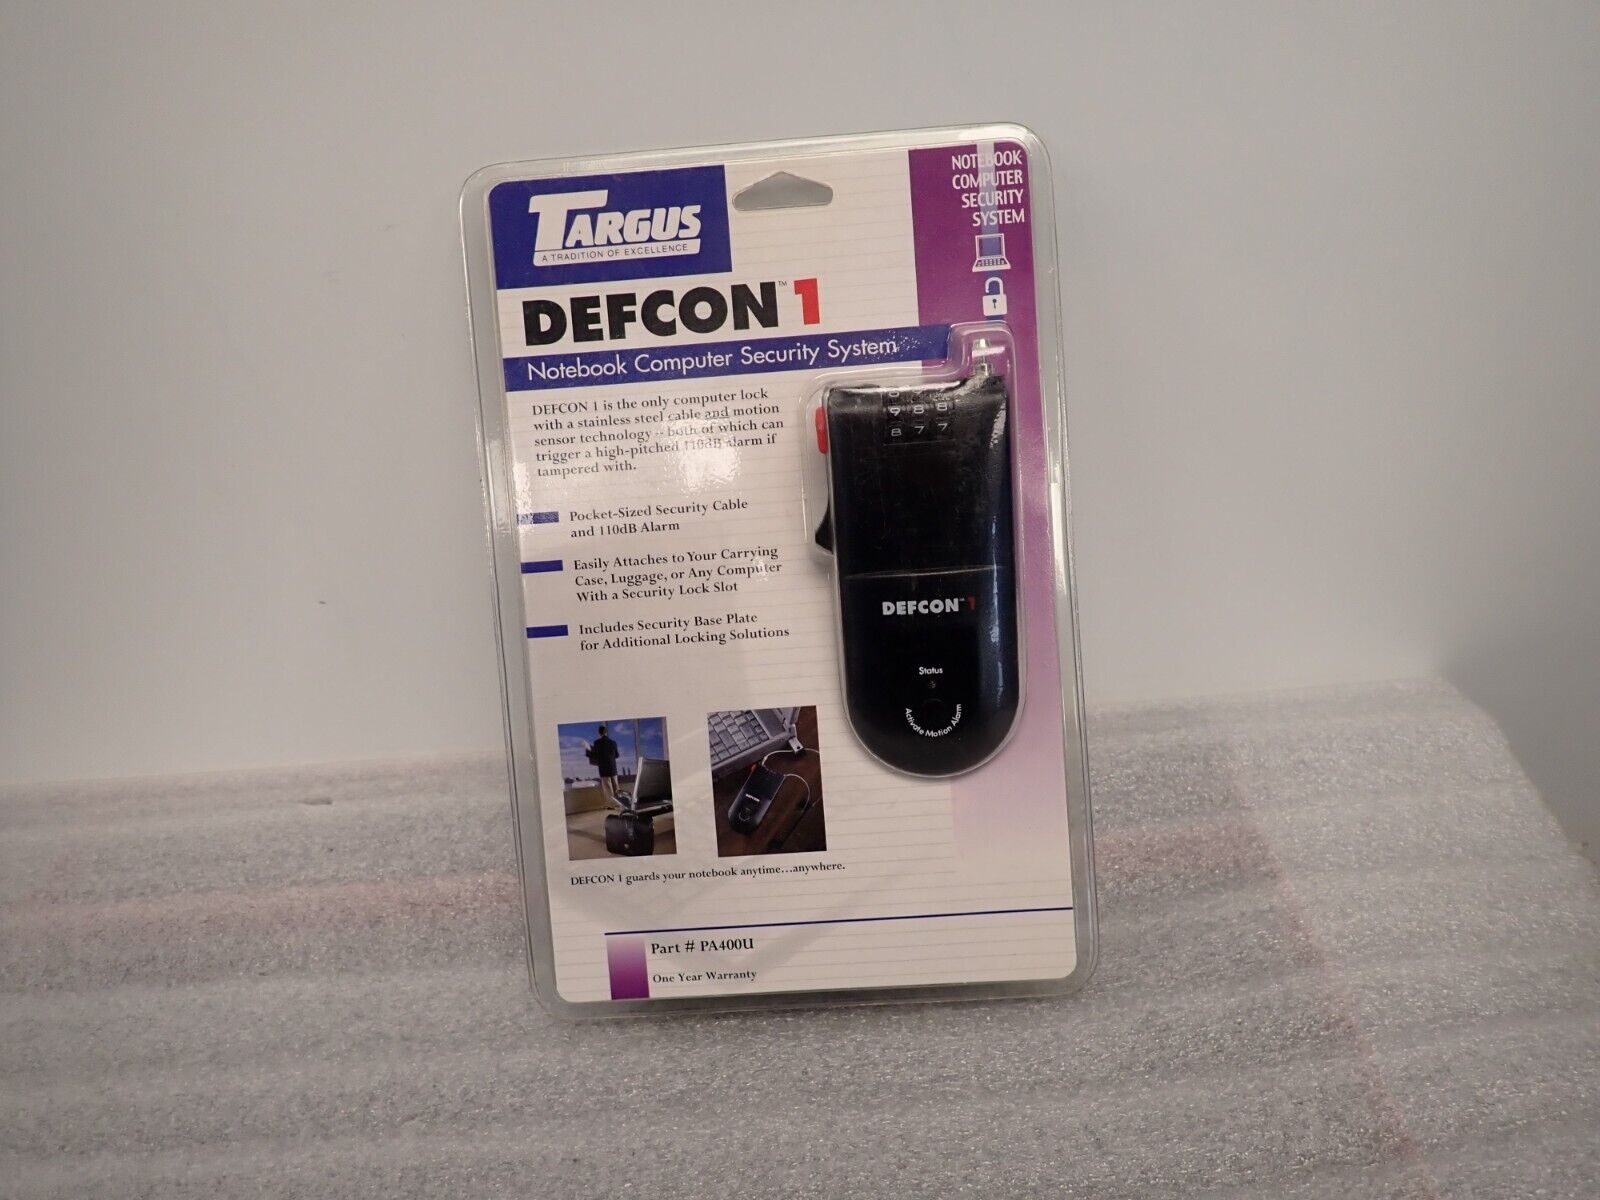 NEW Targus PA400U Defcon 1 Notebook Luggage Alarm Computer Security System